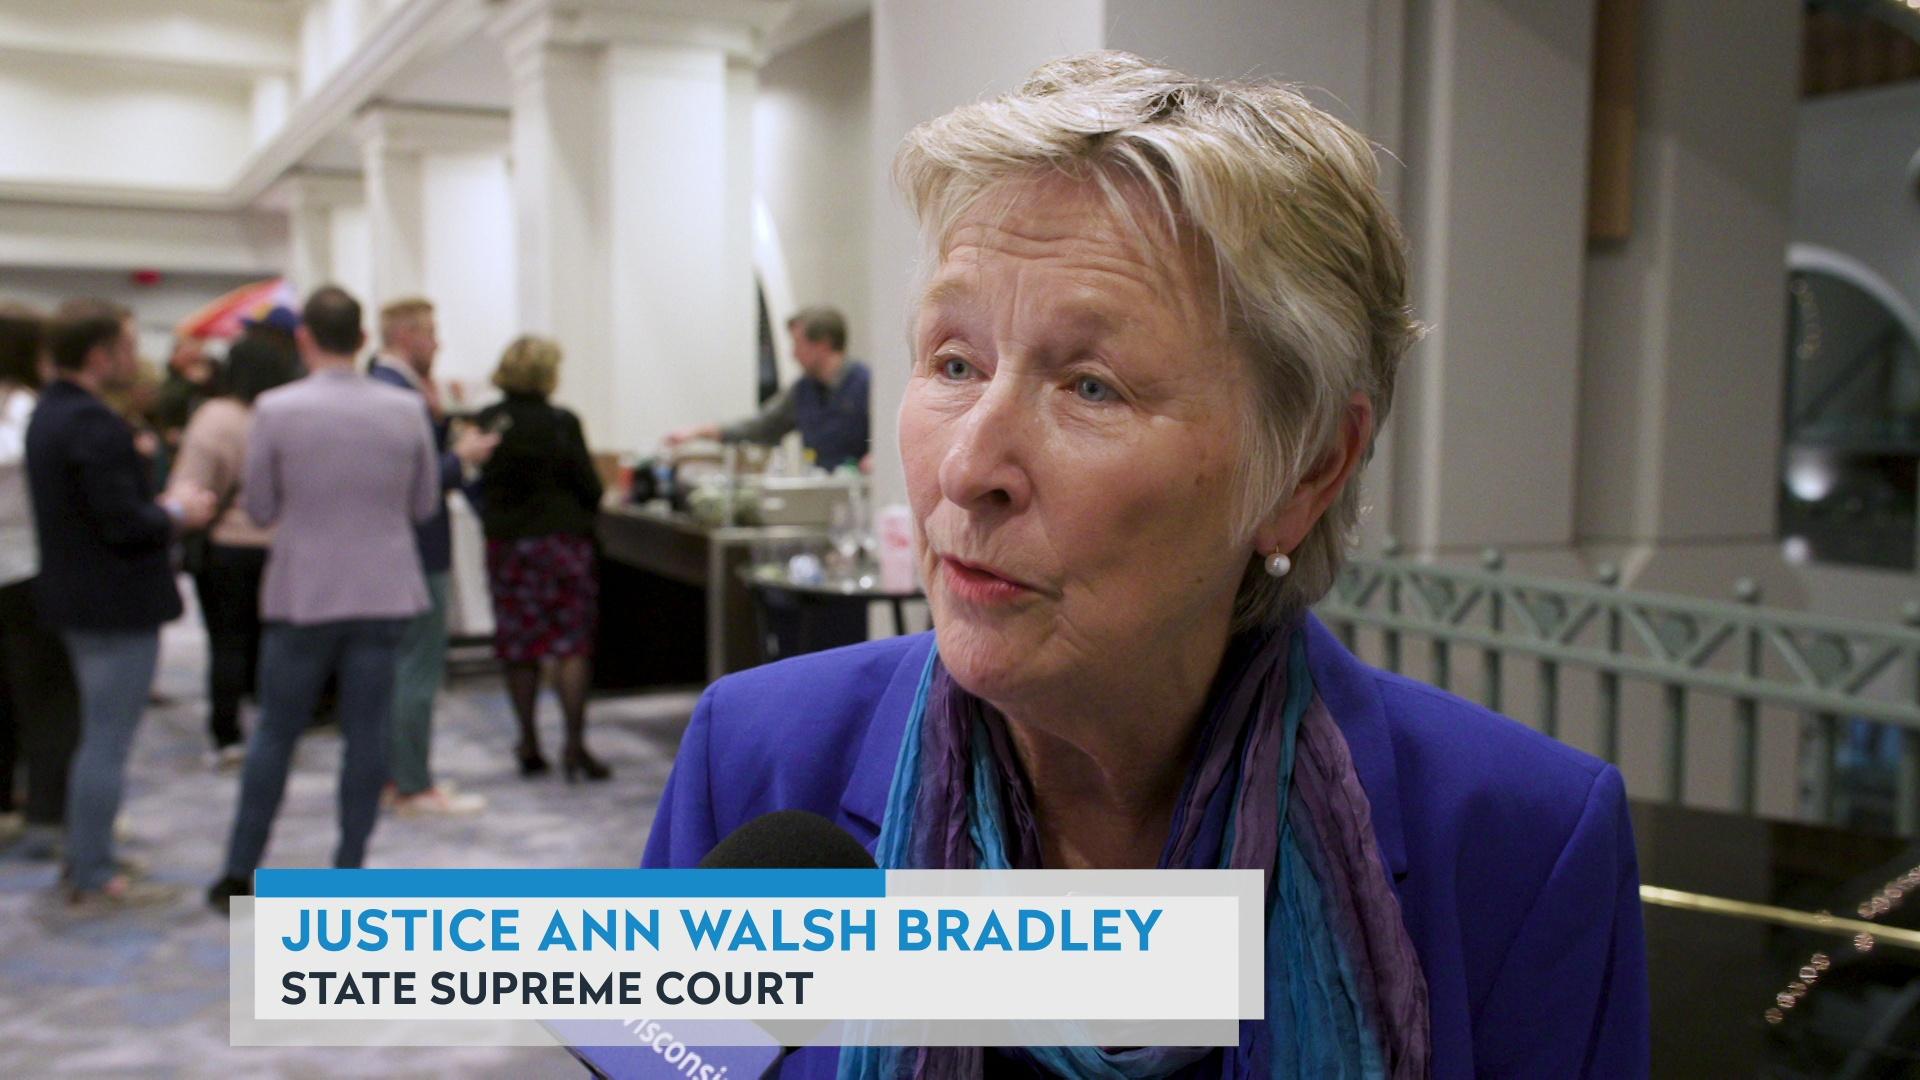 A still image from a video shows Ann Walsh Bradley being interviewed in a large room with people standing in the background and a graphic that reads 'Justice Ann Walsh Bradley' and 'State Supreme Court.'